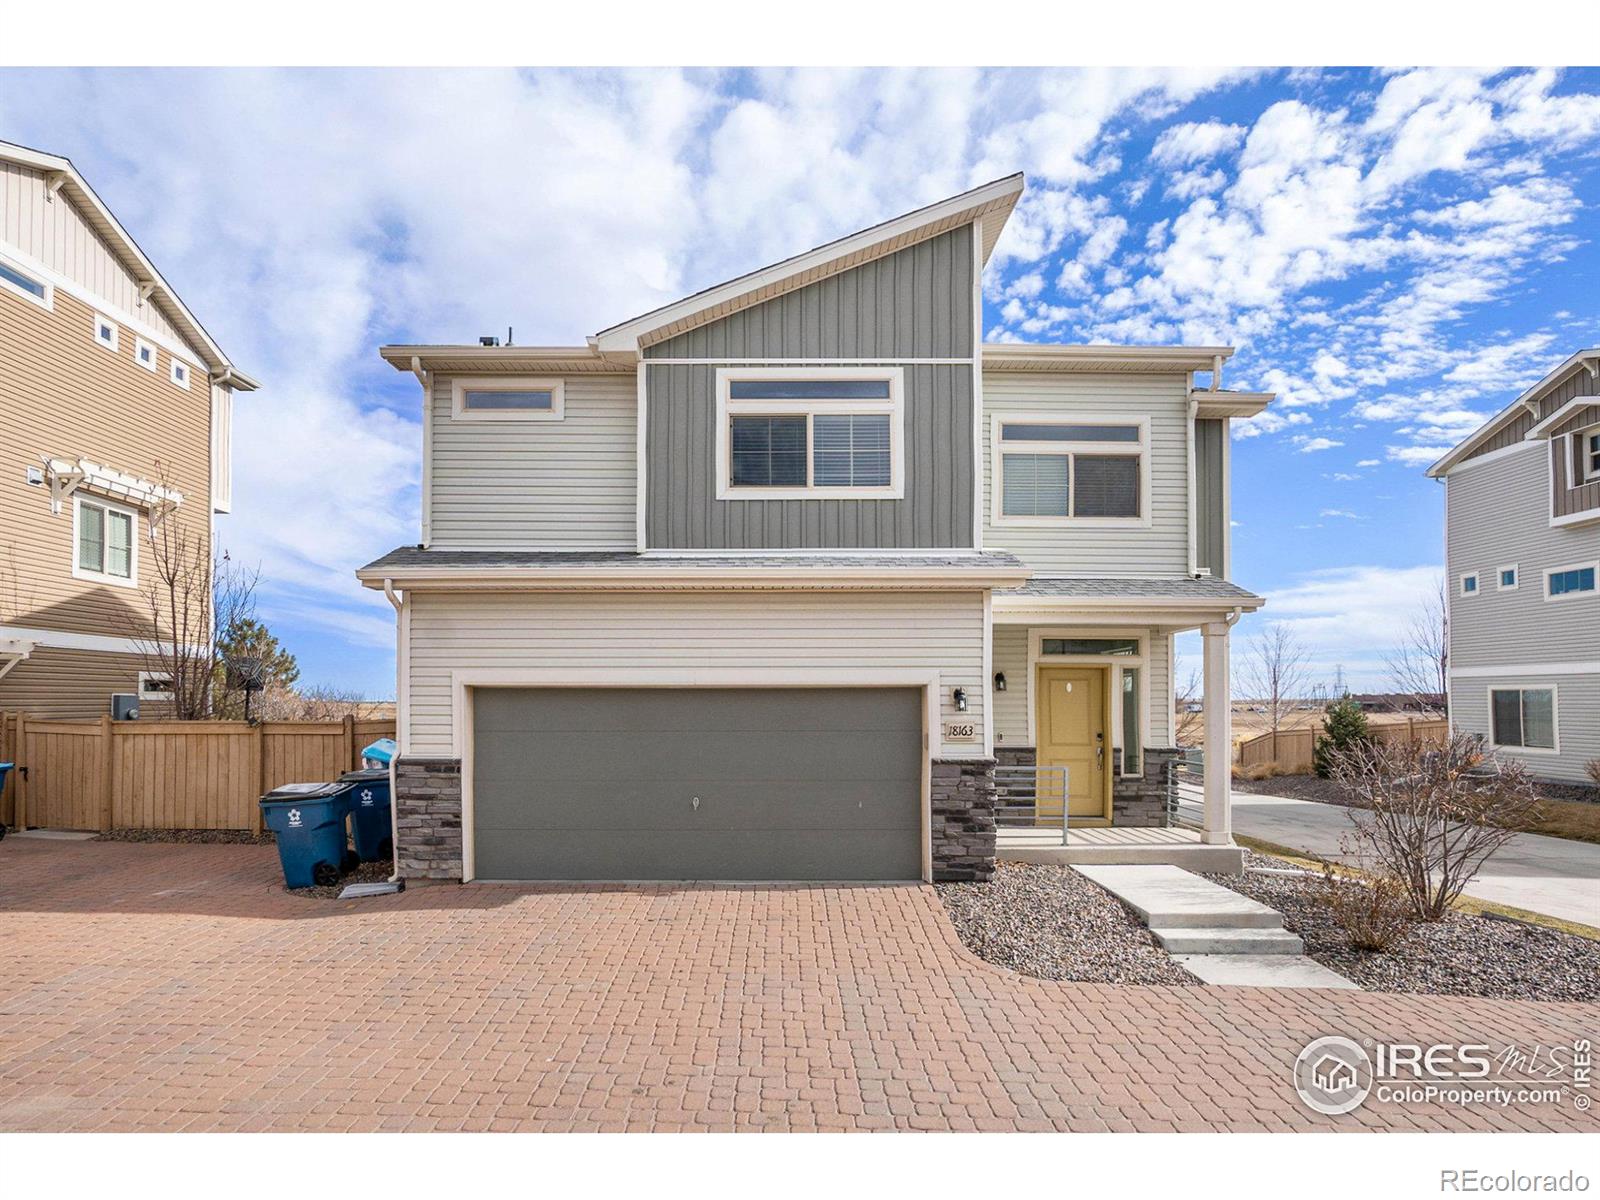 18163 E 104th Way, commerce city MLS: 4567891003842 Beds: 3 Baths: 3 Price: $460,000